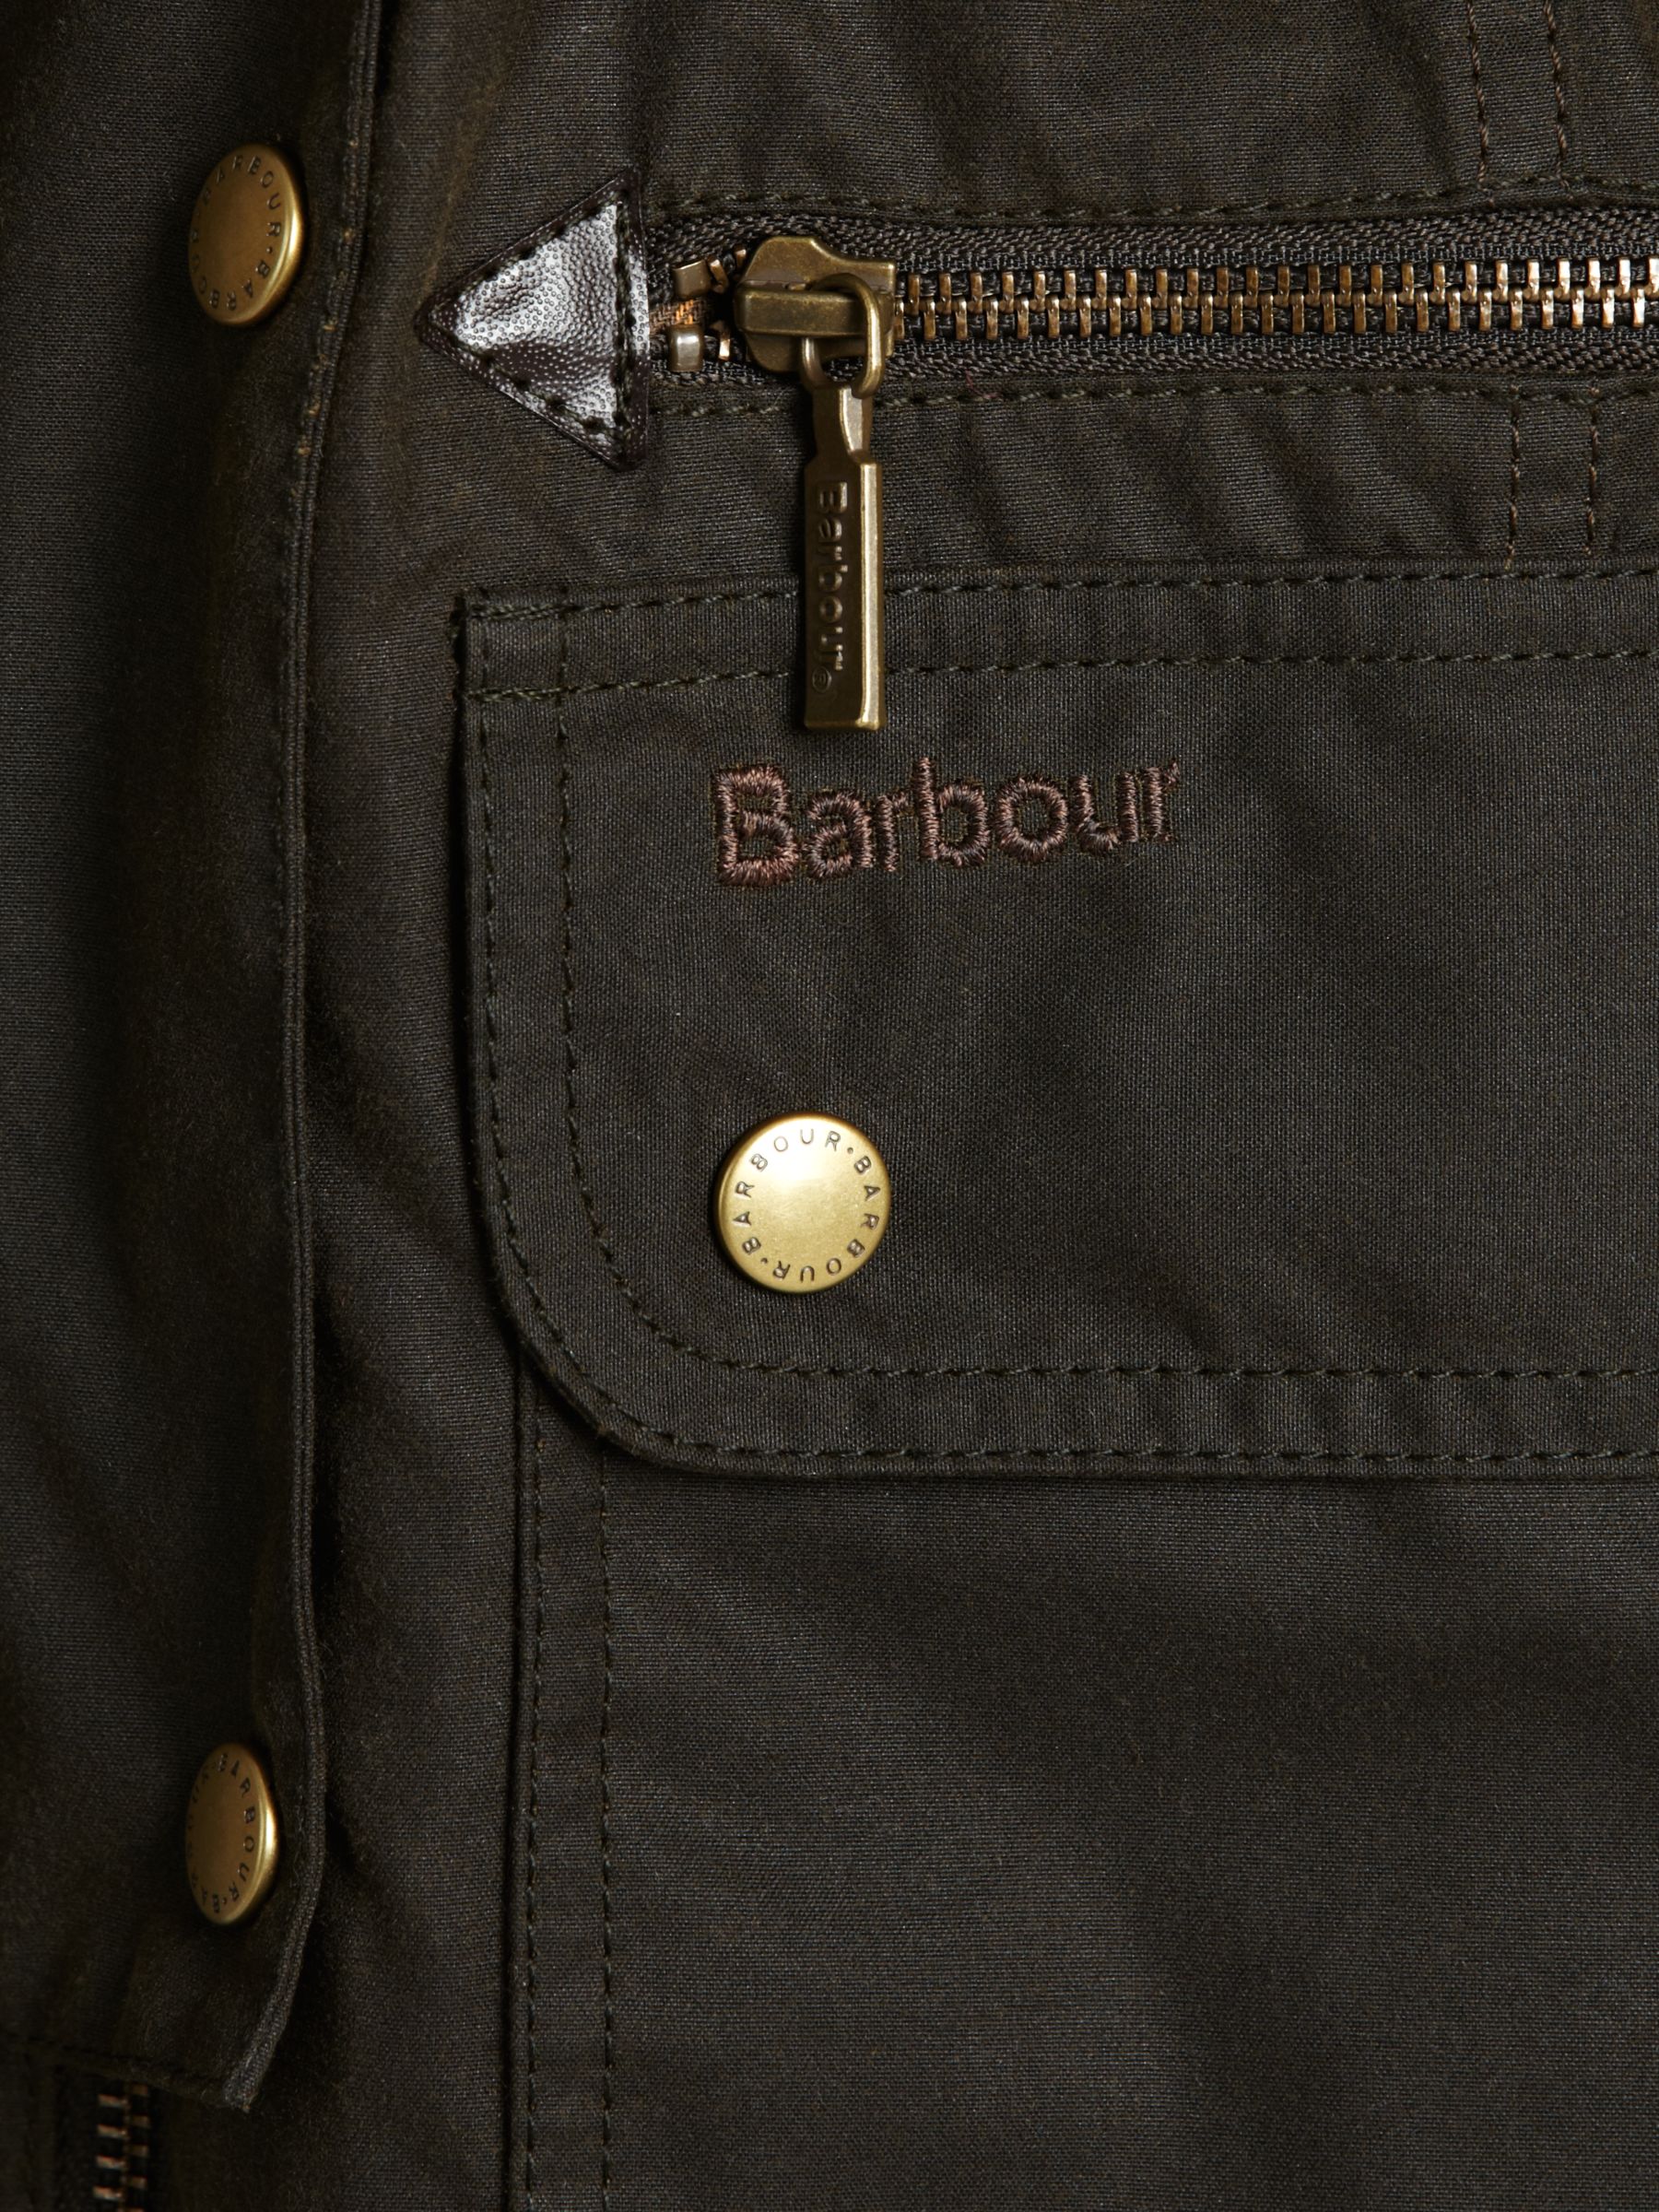 barbour kelsall waxed jacket olive